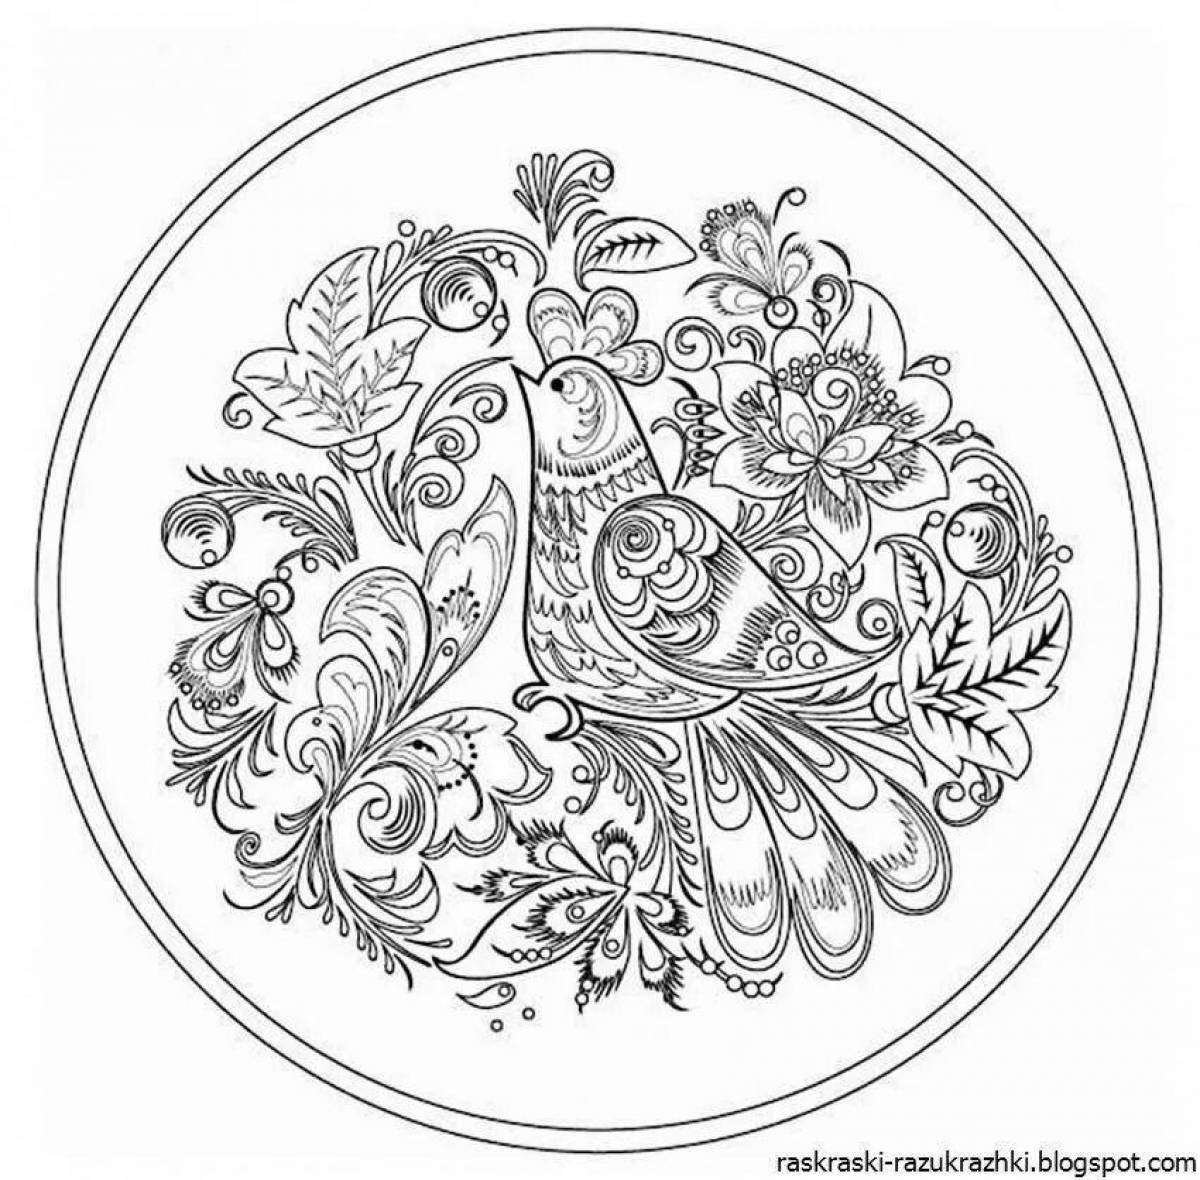 Coloring exquisite Khokhloma plate